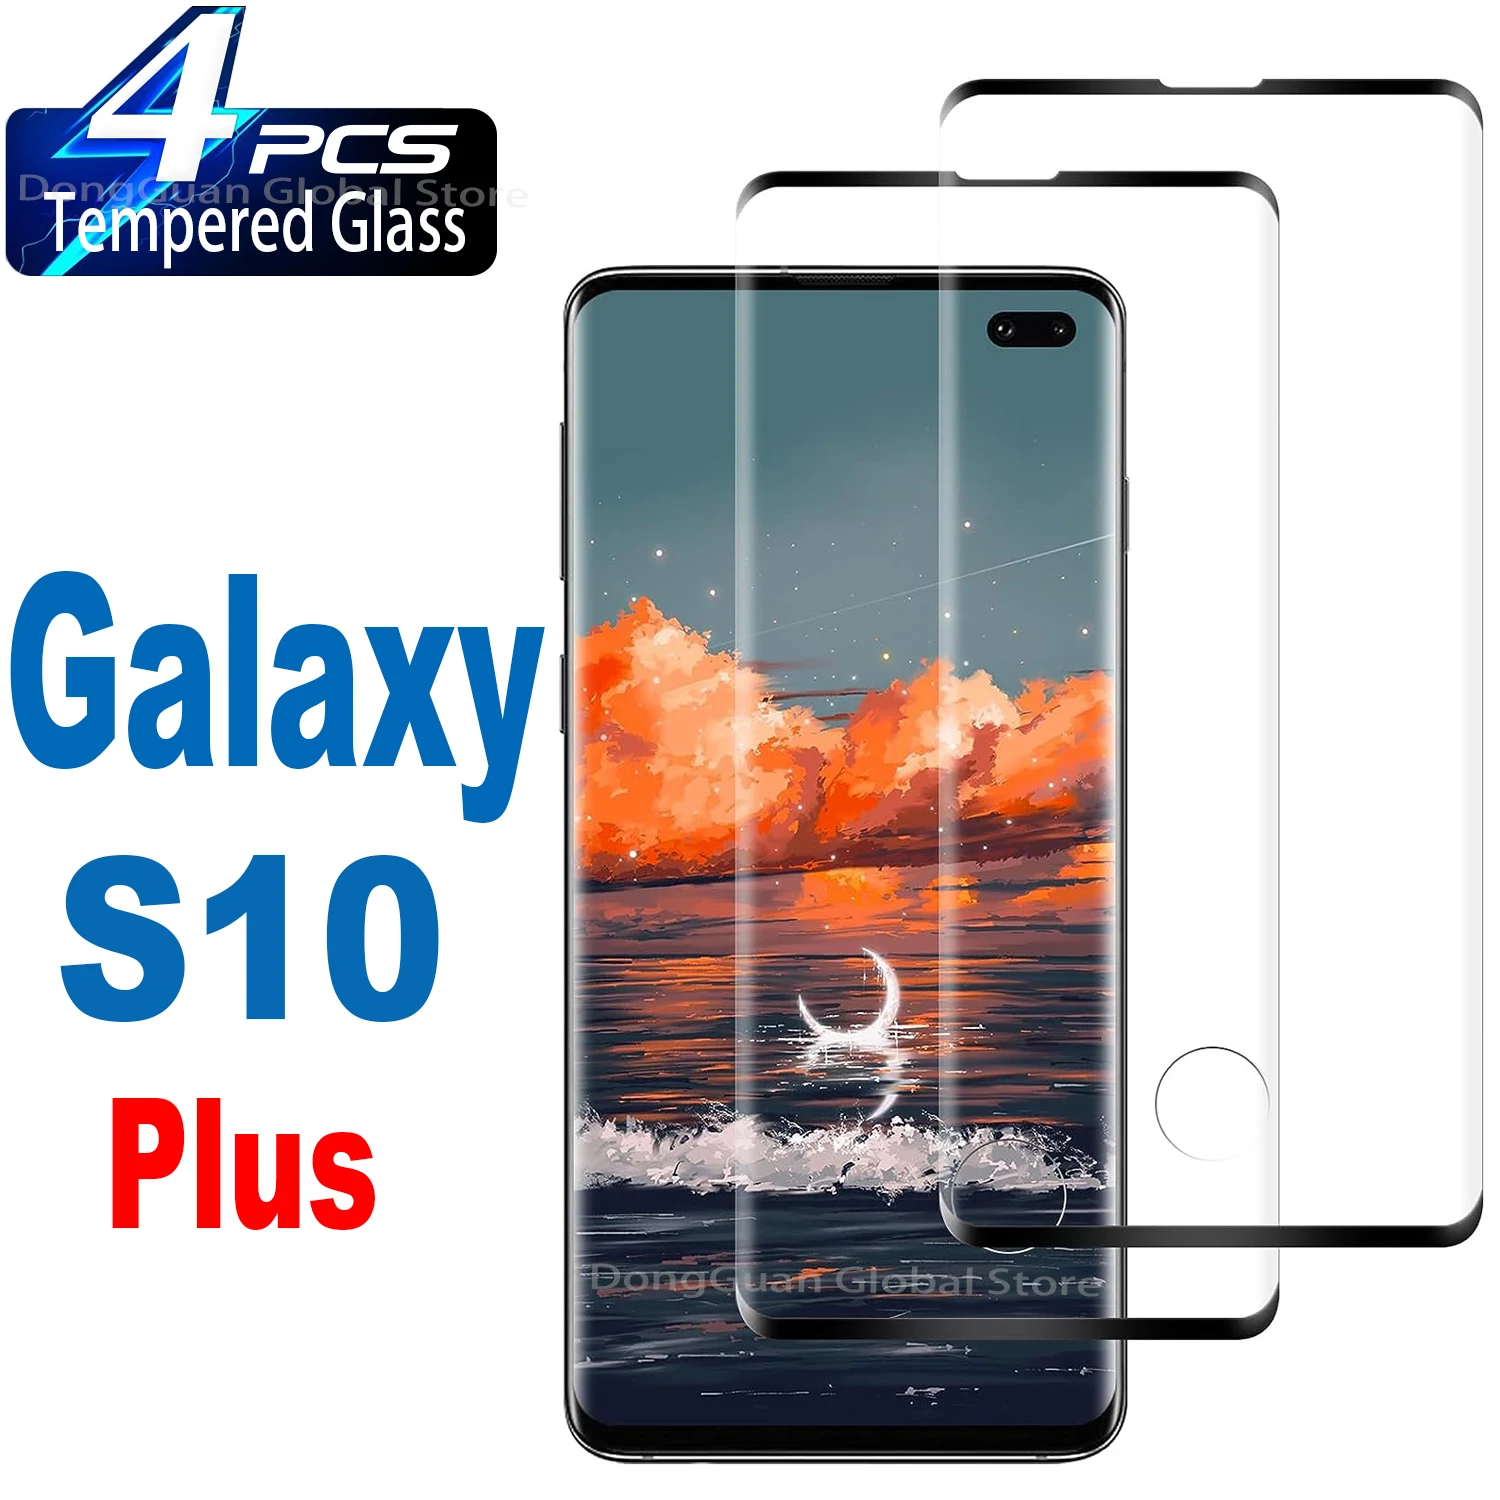 2/4Pcs Tempered Glass For Samsung Galaxy S10 Plus S10+ S20 S20+ Plus Screen Protector Glass brand phone case for samsung galaxy s20 ultra plus s20 s10 e a50 a51 a71 a8 2018 genuine leather shockproof back cover